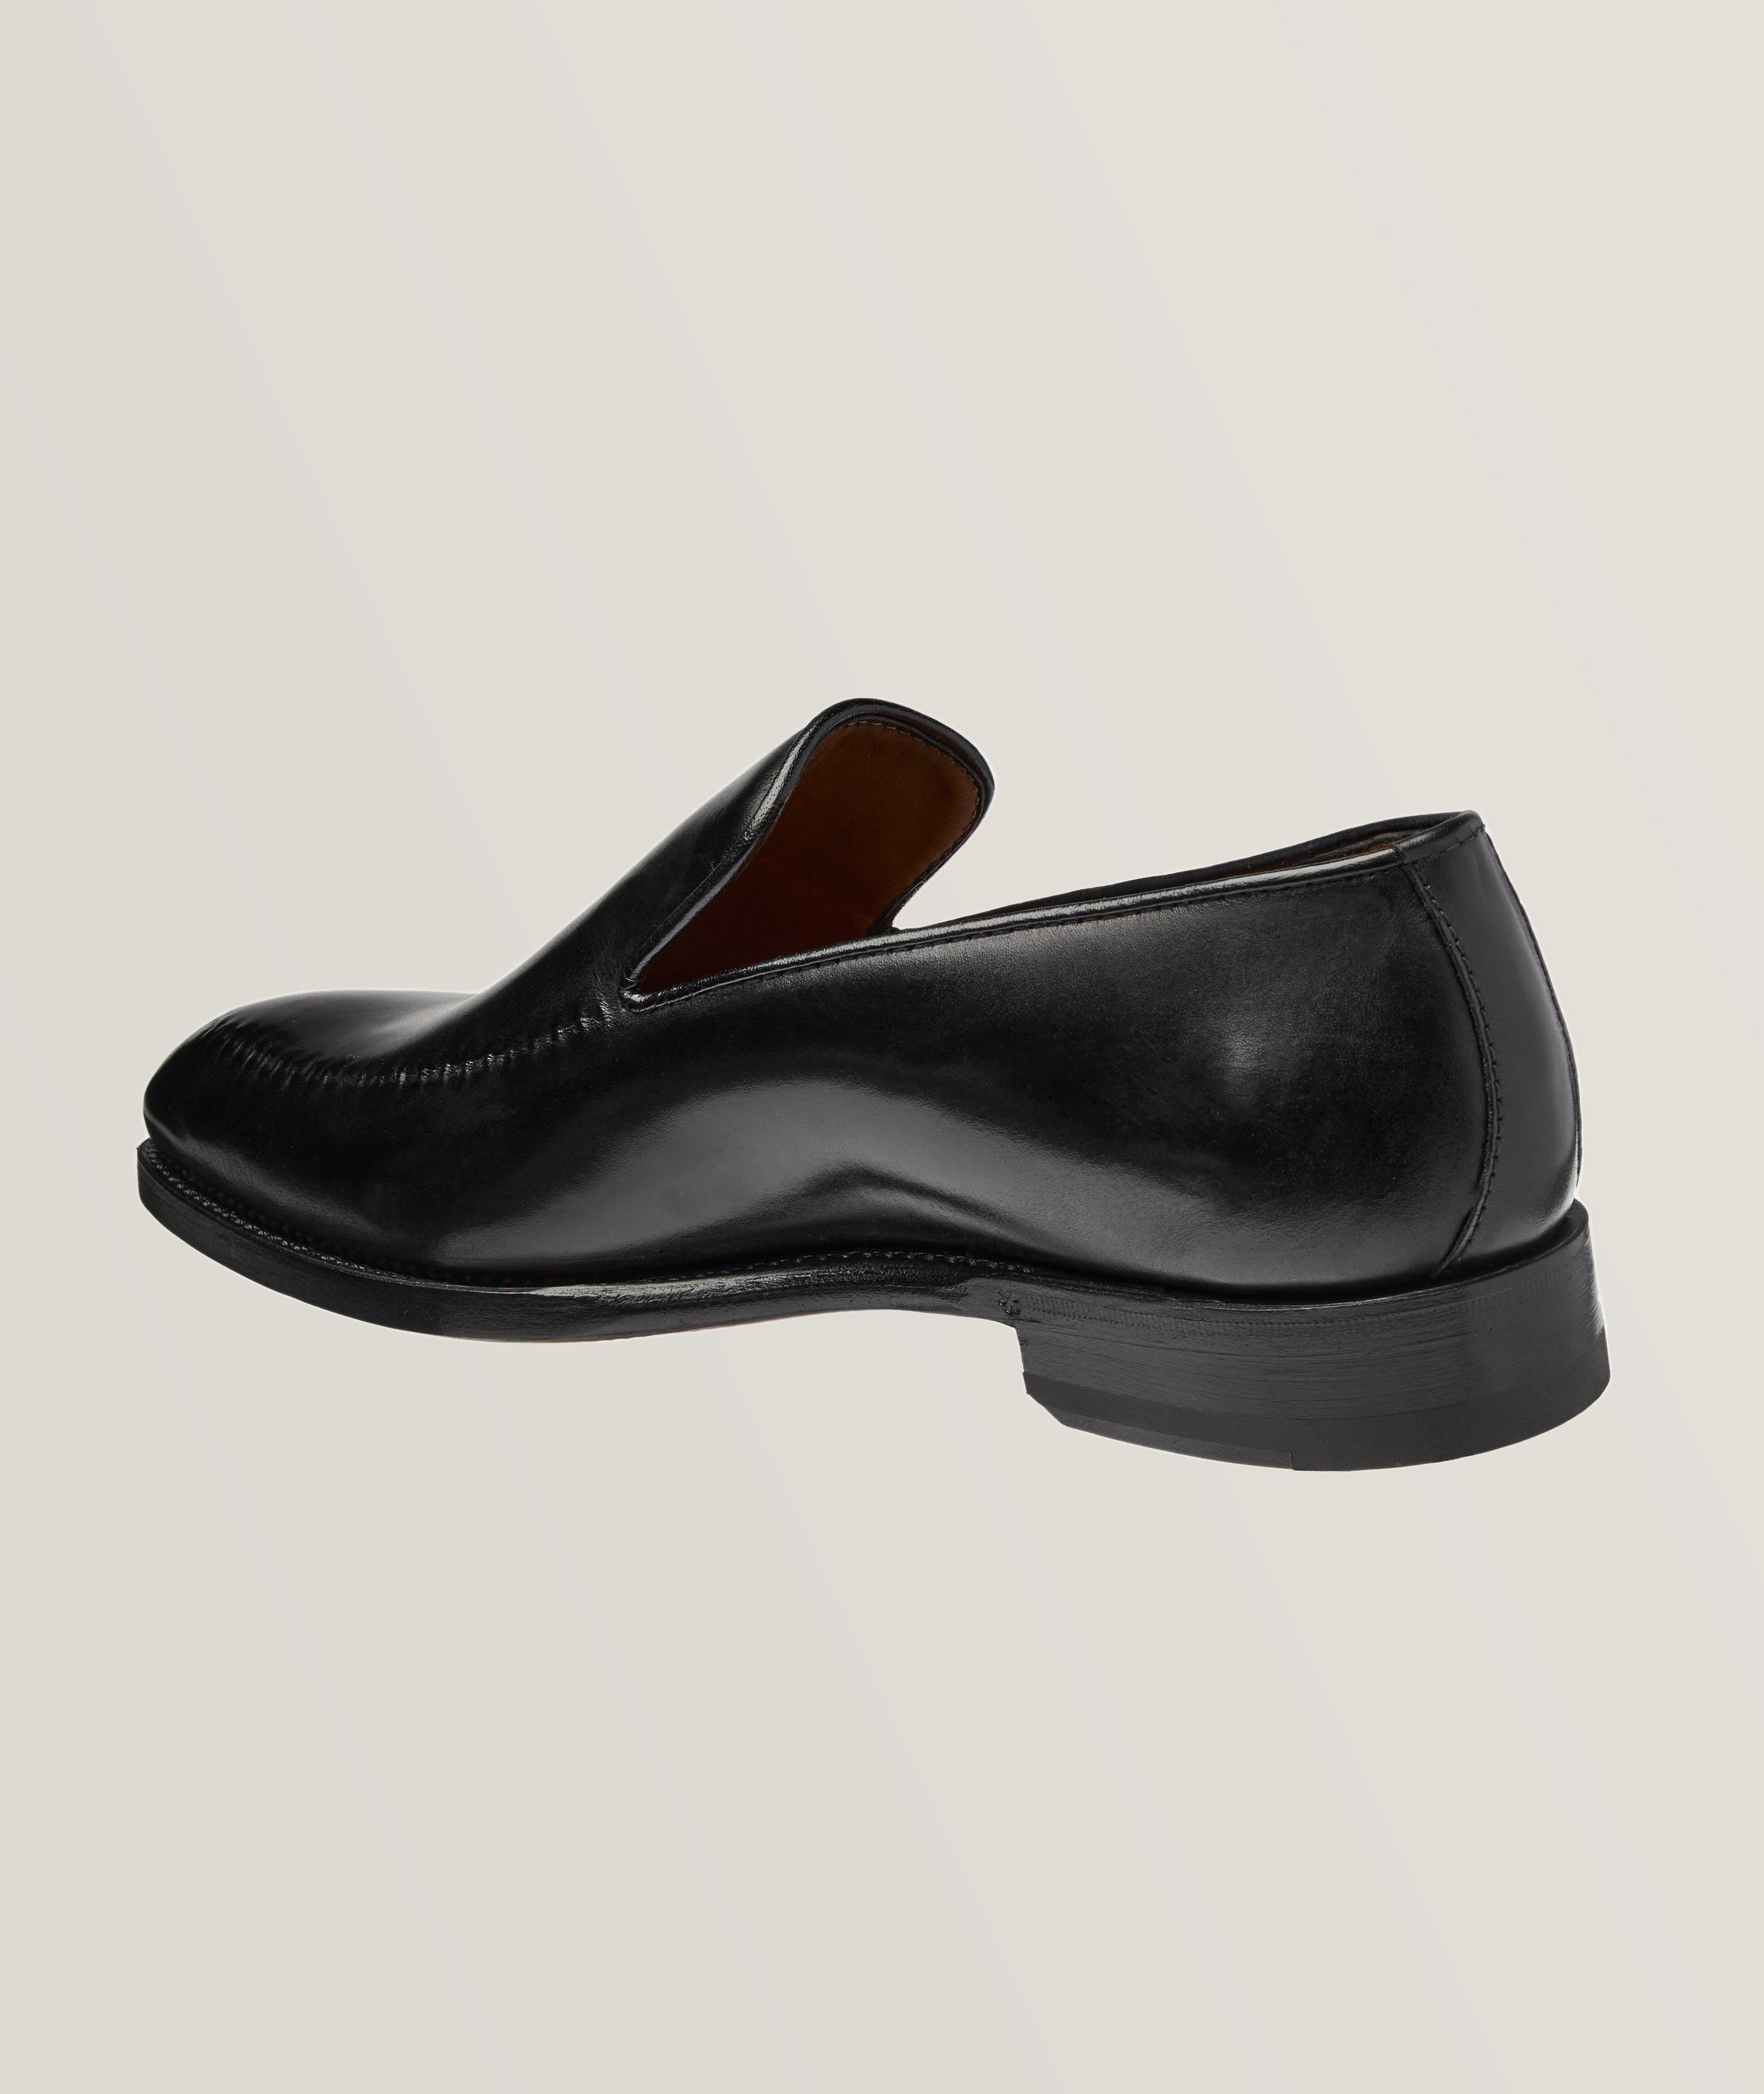 Sallustio Whole-Cut Leather Loafers